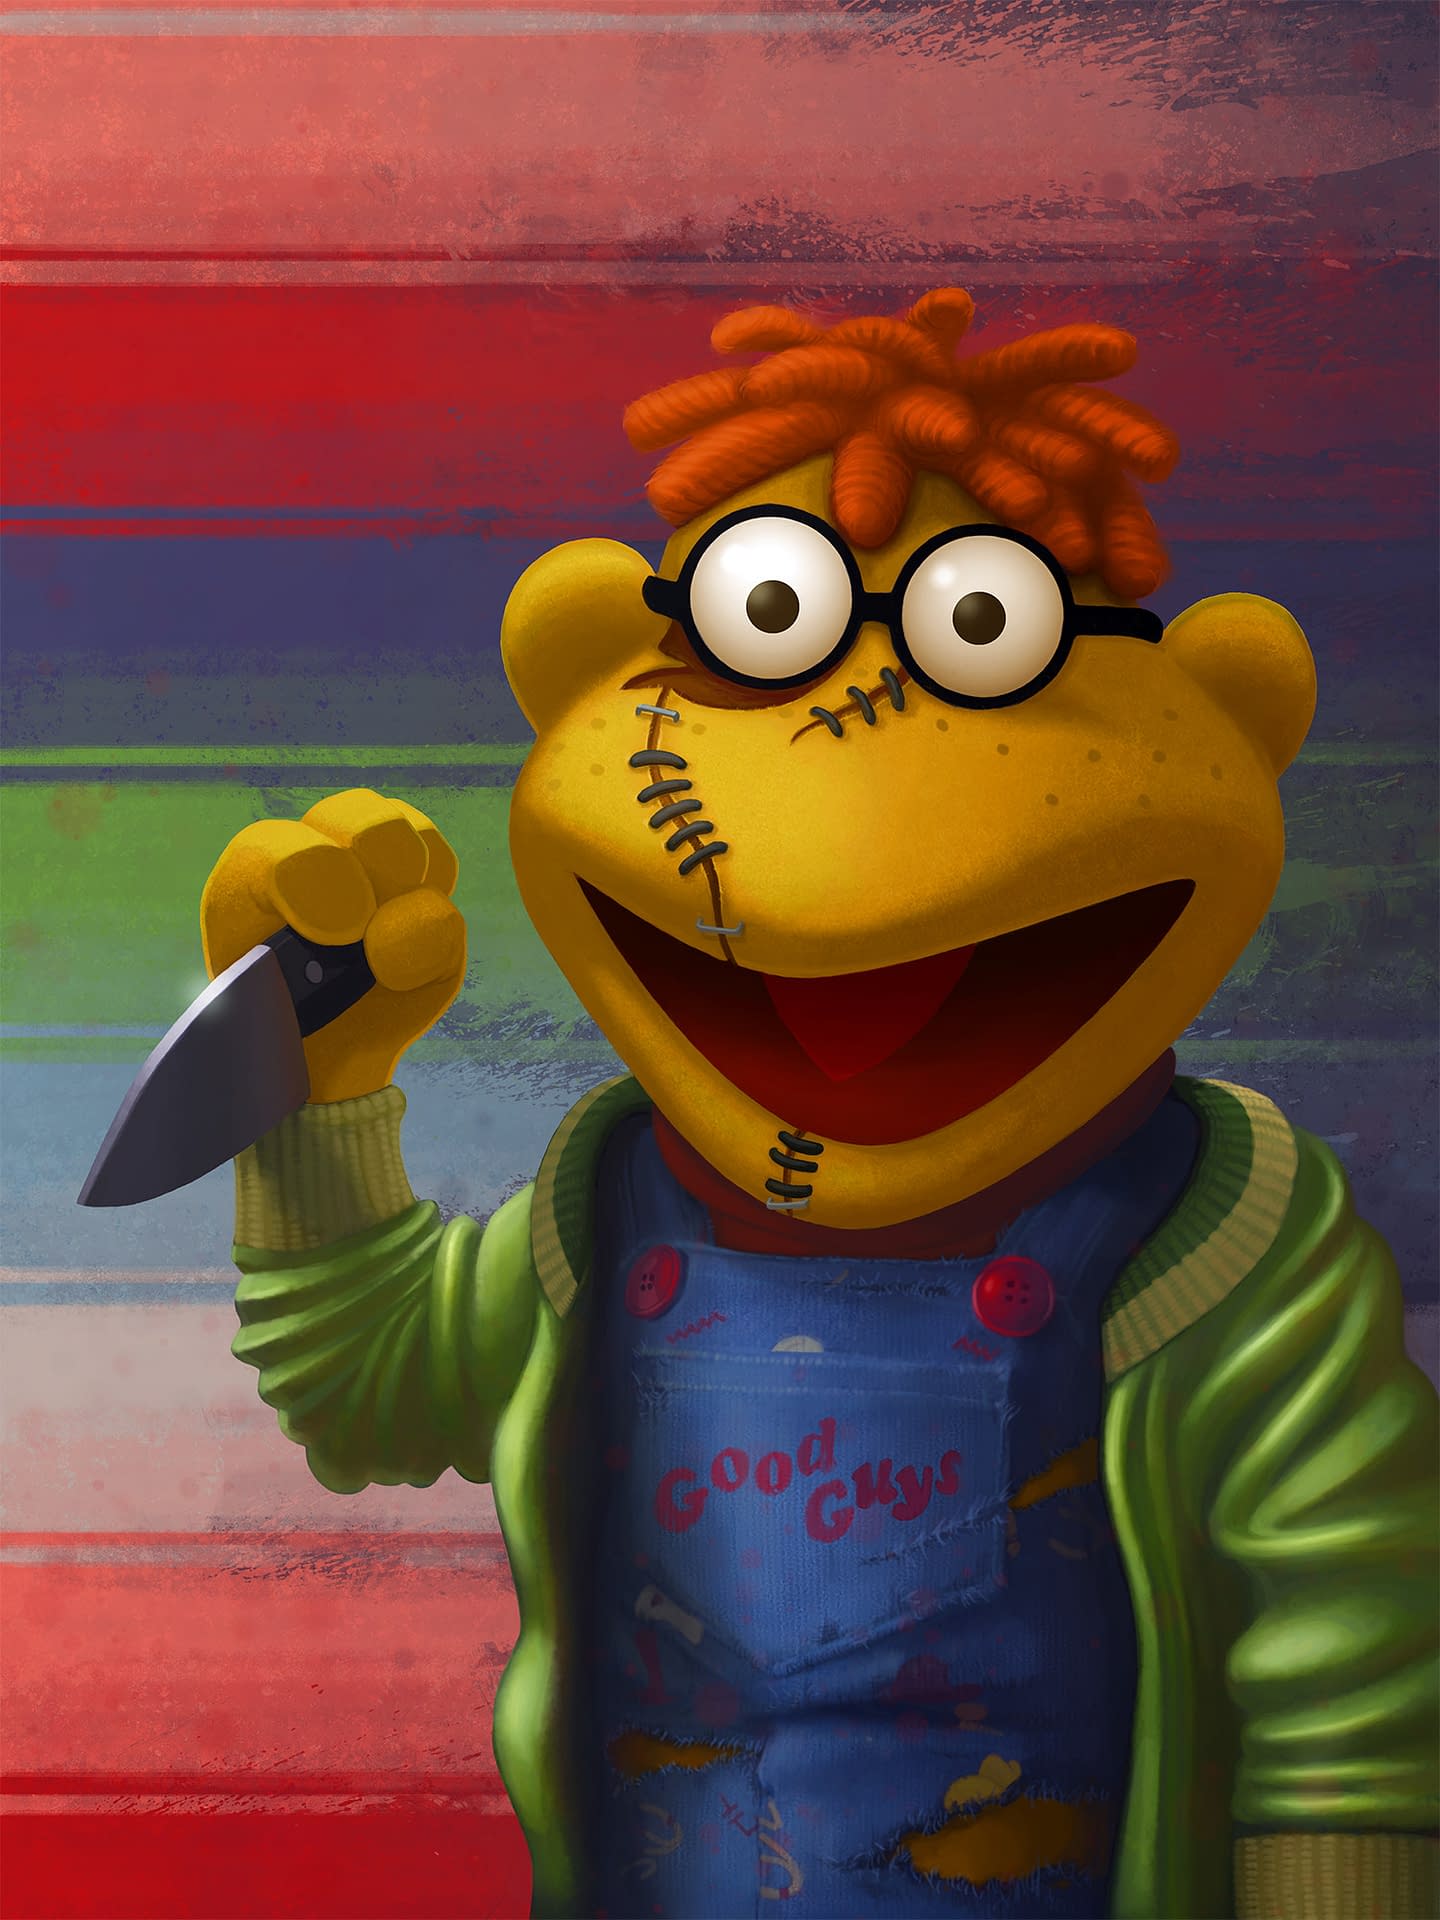 Horror Icons + The Muppets = The Only Thing You Need To See Today